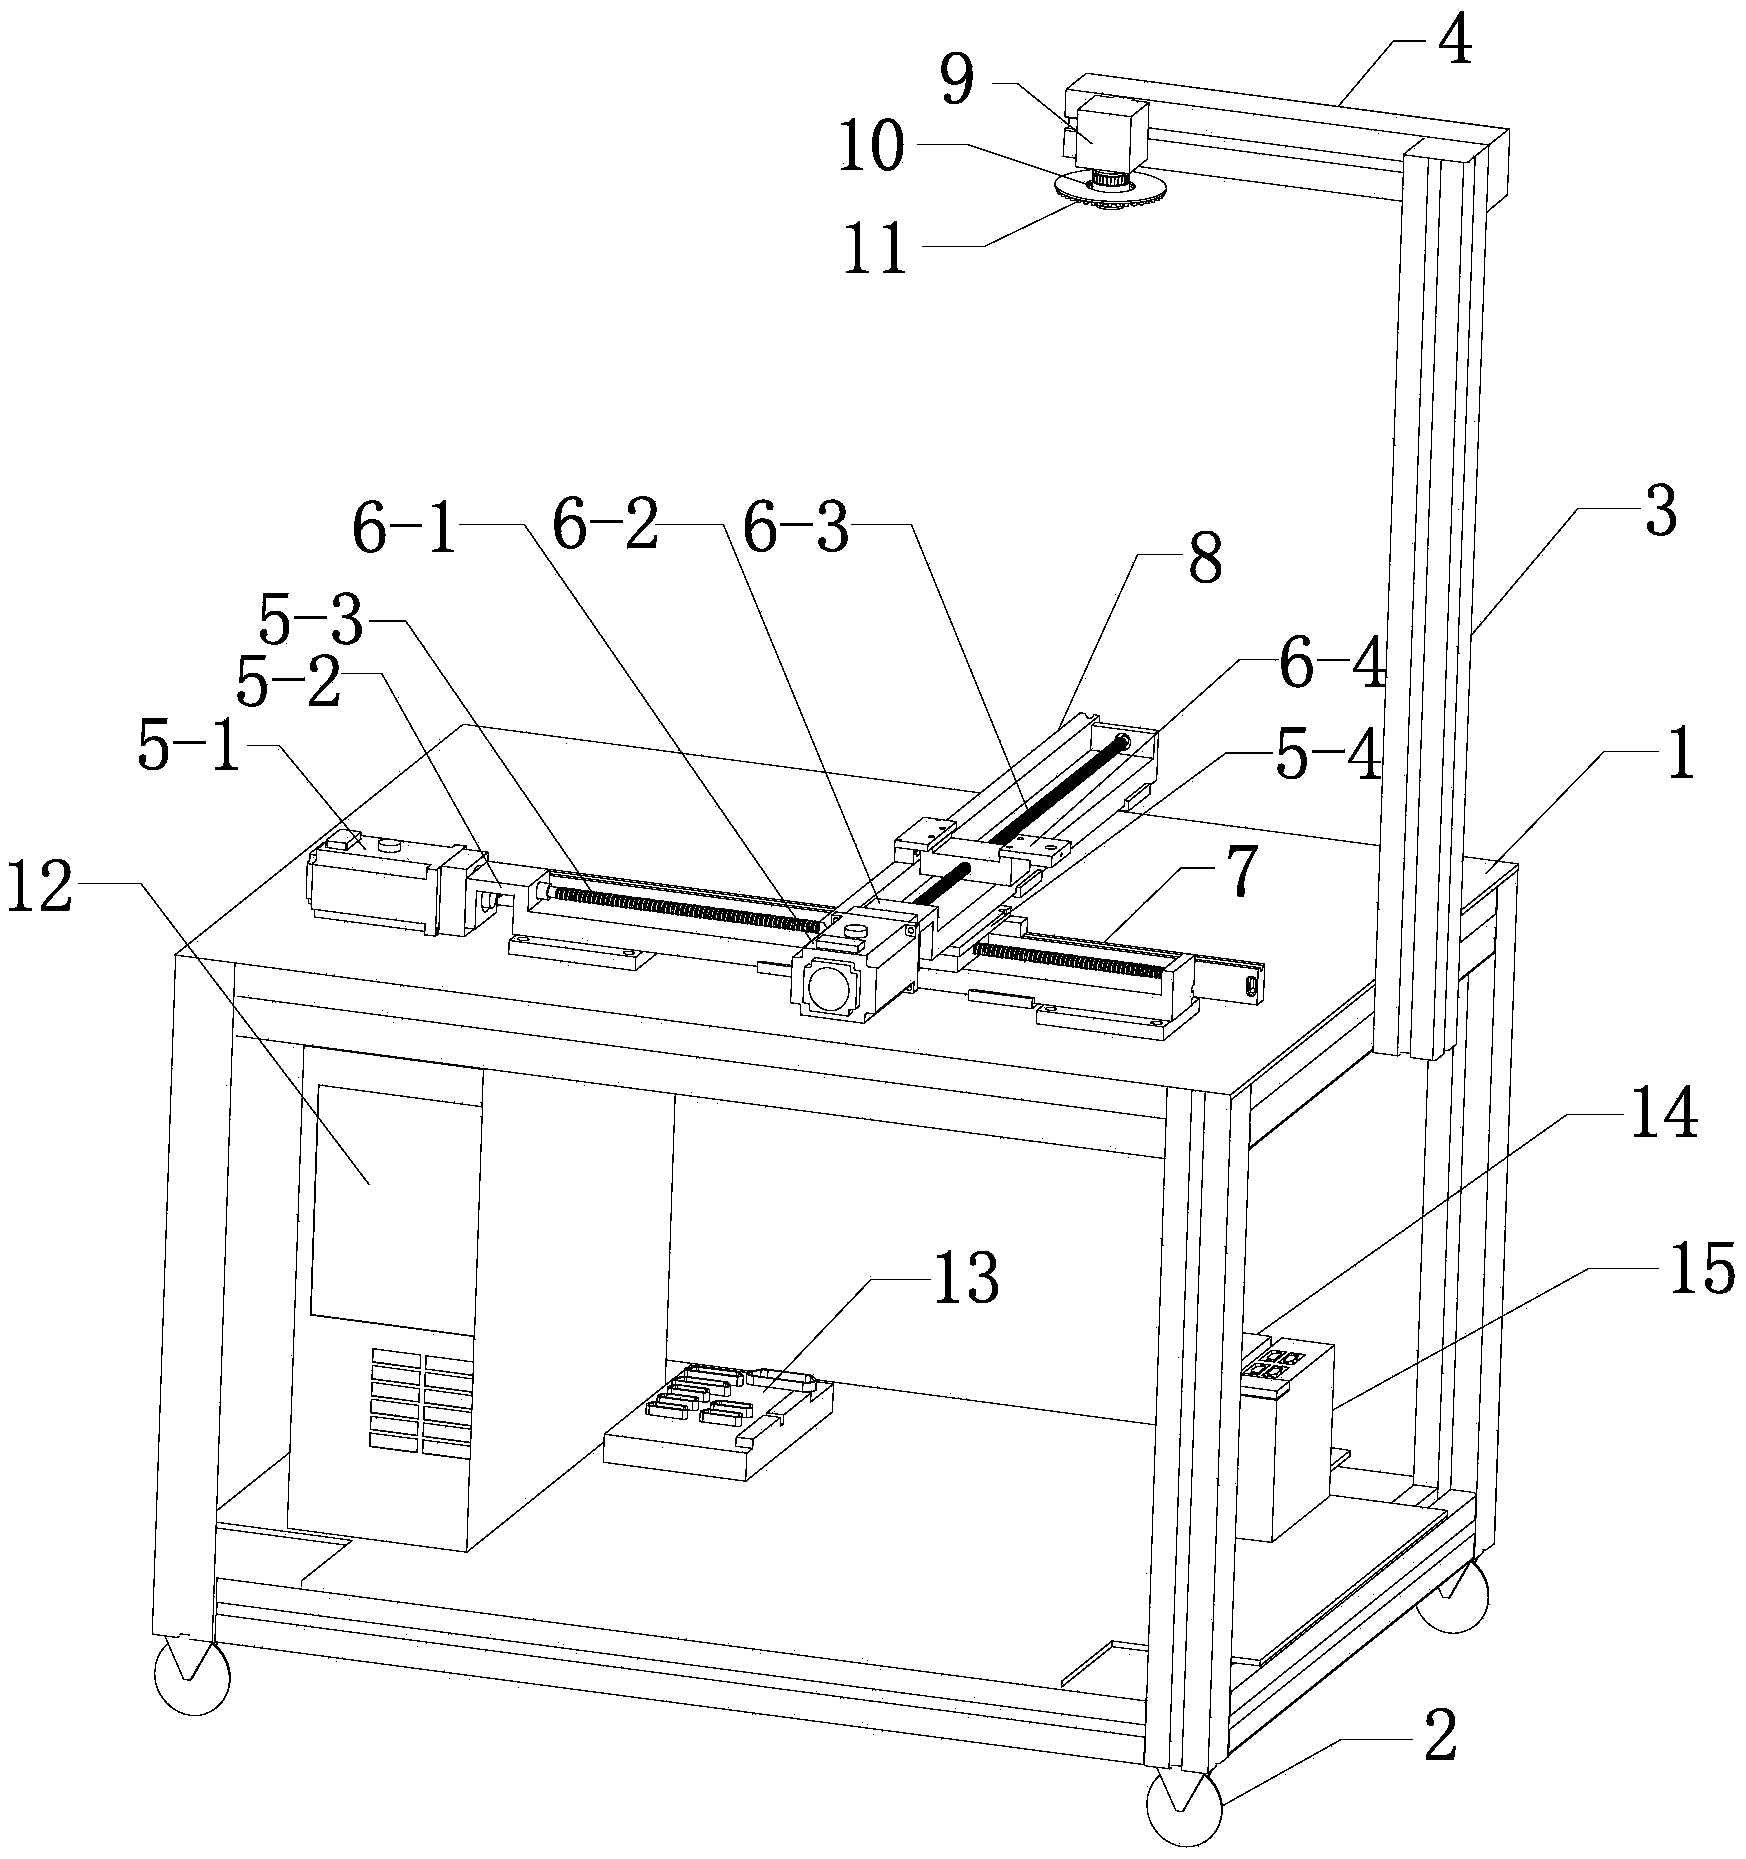 Special testing device and method for correcting welding track based on machine vision